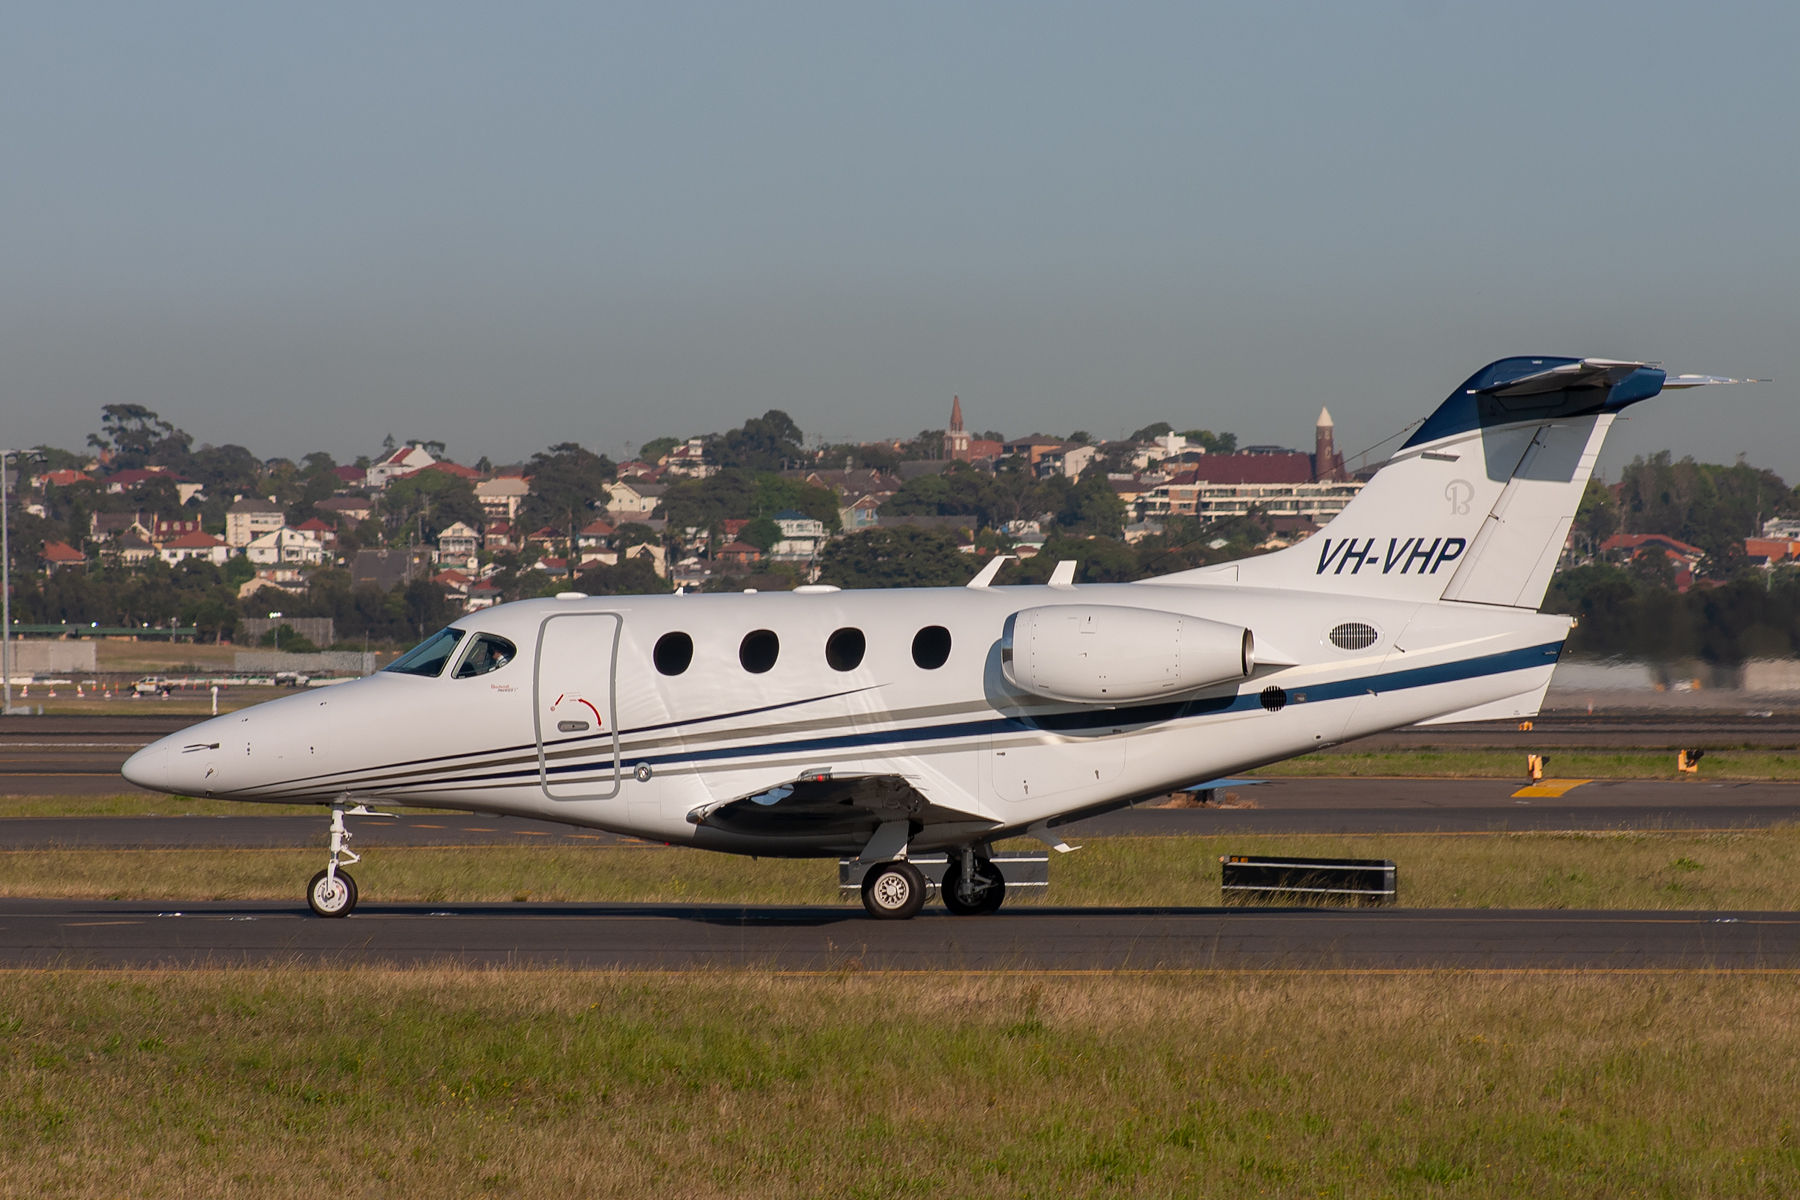 Sydney Jet Charter (Pty) Hawker Hawker 390A VH-VHP at Kingsford Smith